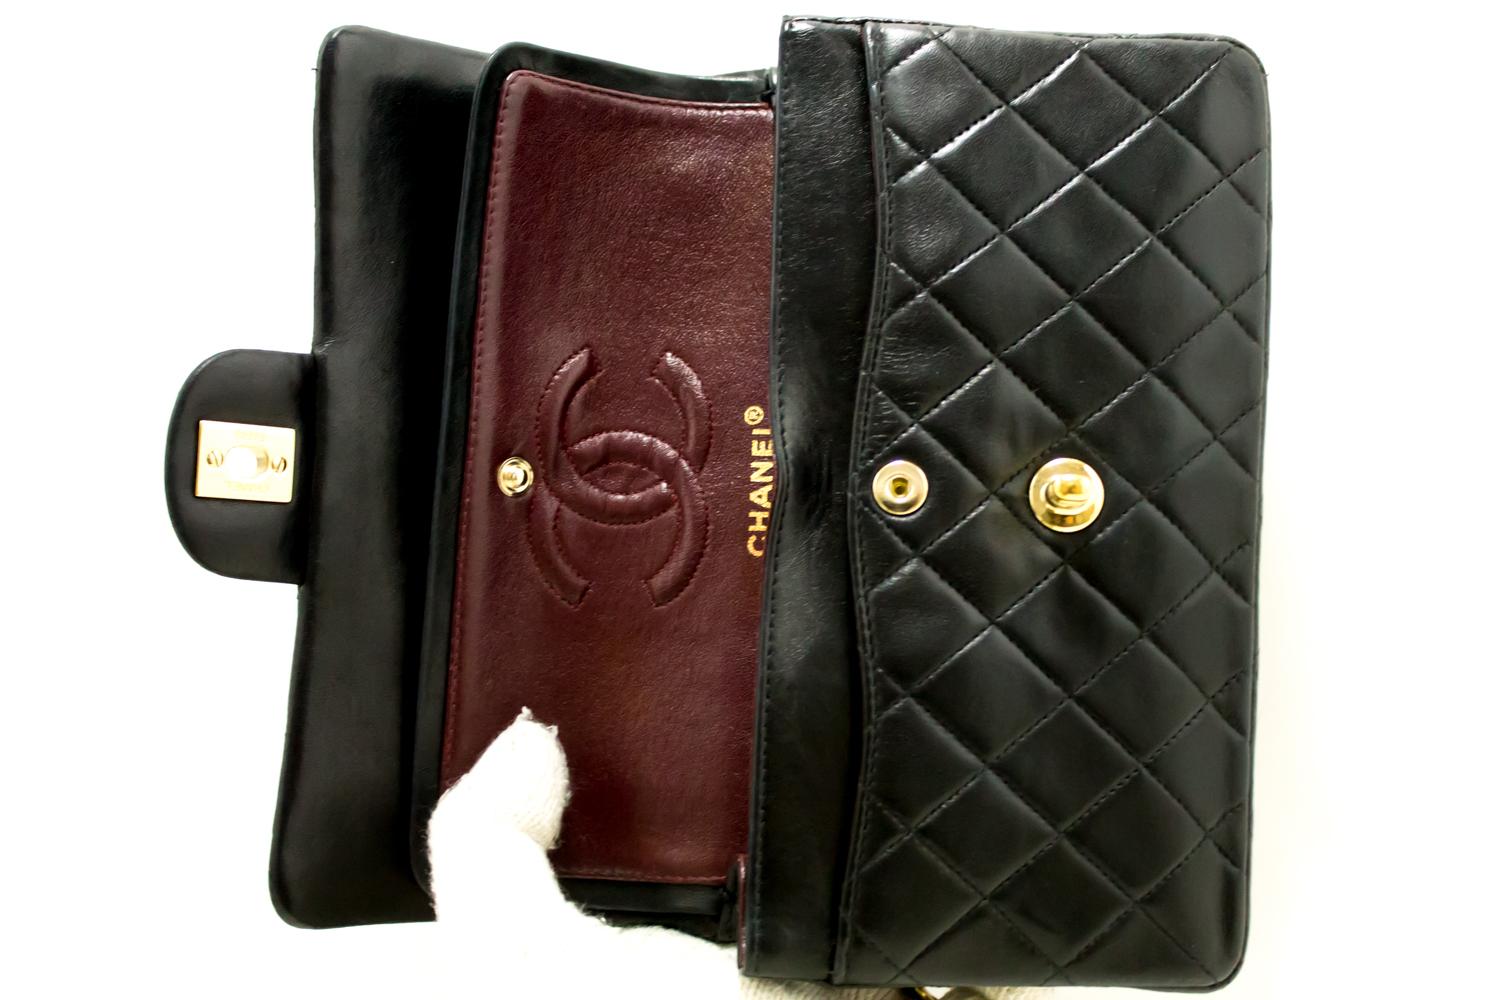 CHANEL 2.55 Double Flap Small Chain Shoulder Bag Black Quilted 6